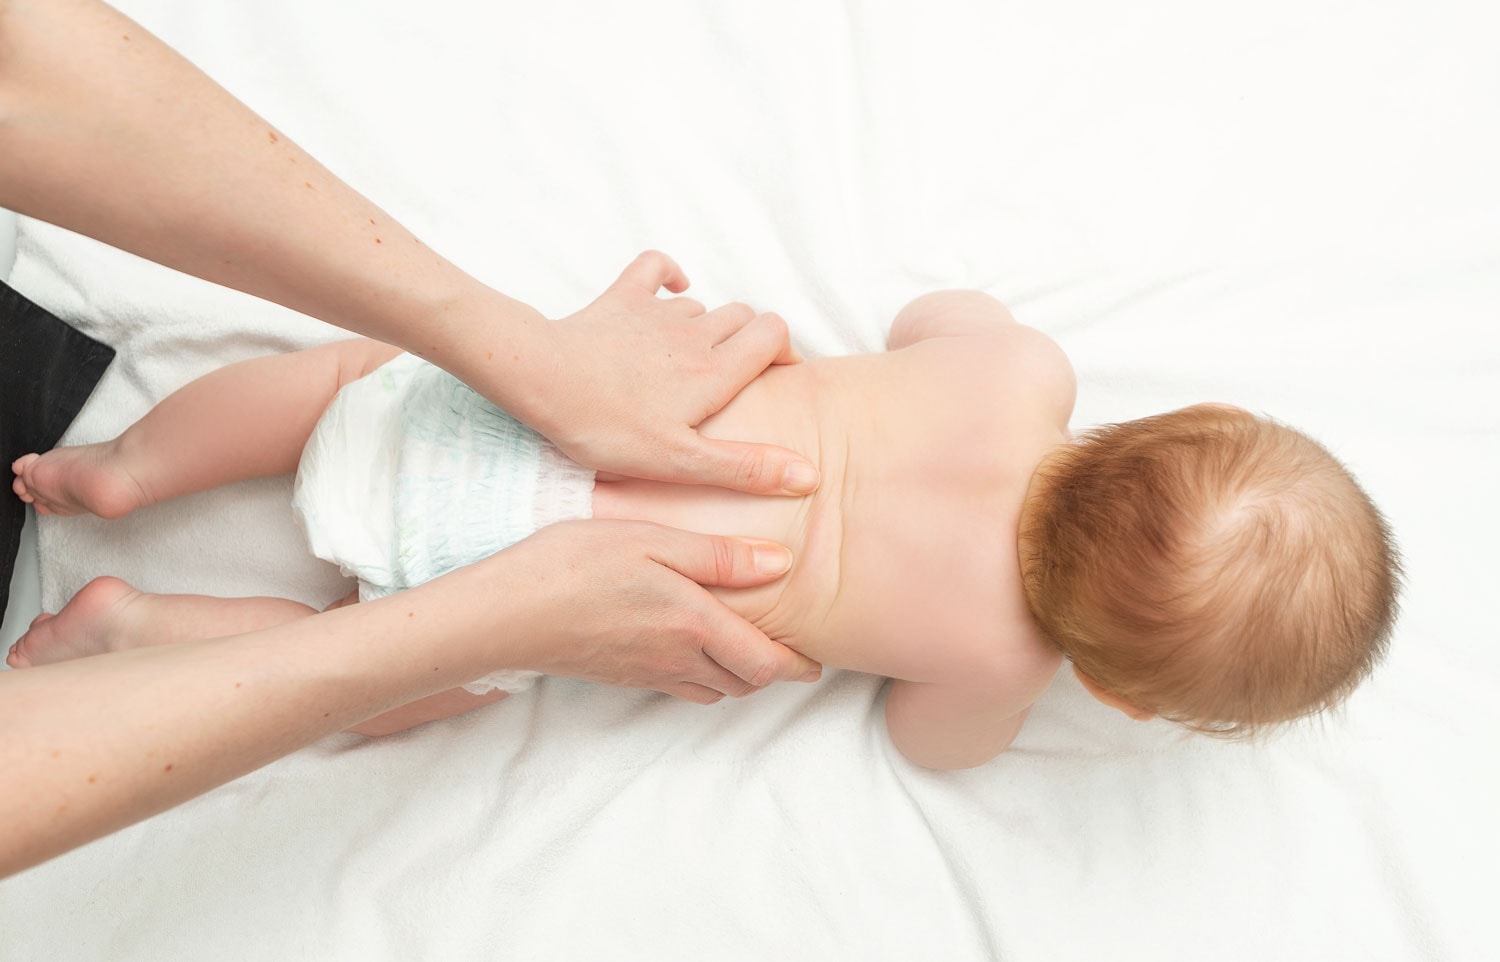 An infant receiving a gentle back massage from a Postpartum Doula's hands, lying comfortably on a white blanket, highlighting the importance of touch in baby's growth and relaxation.